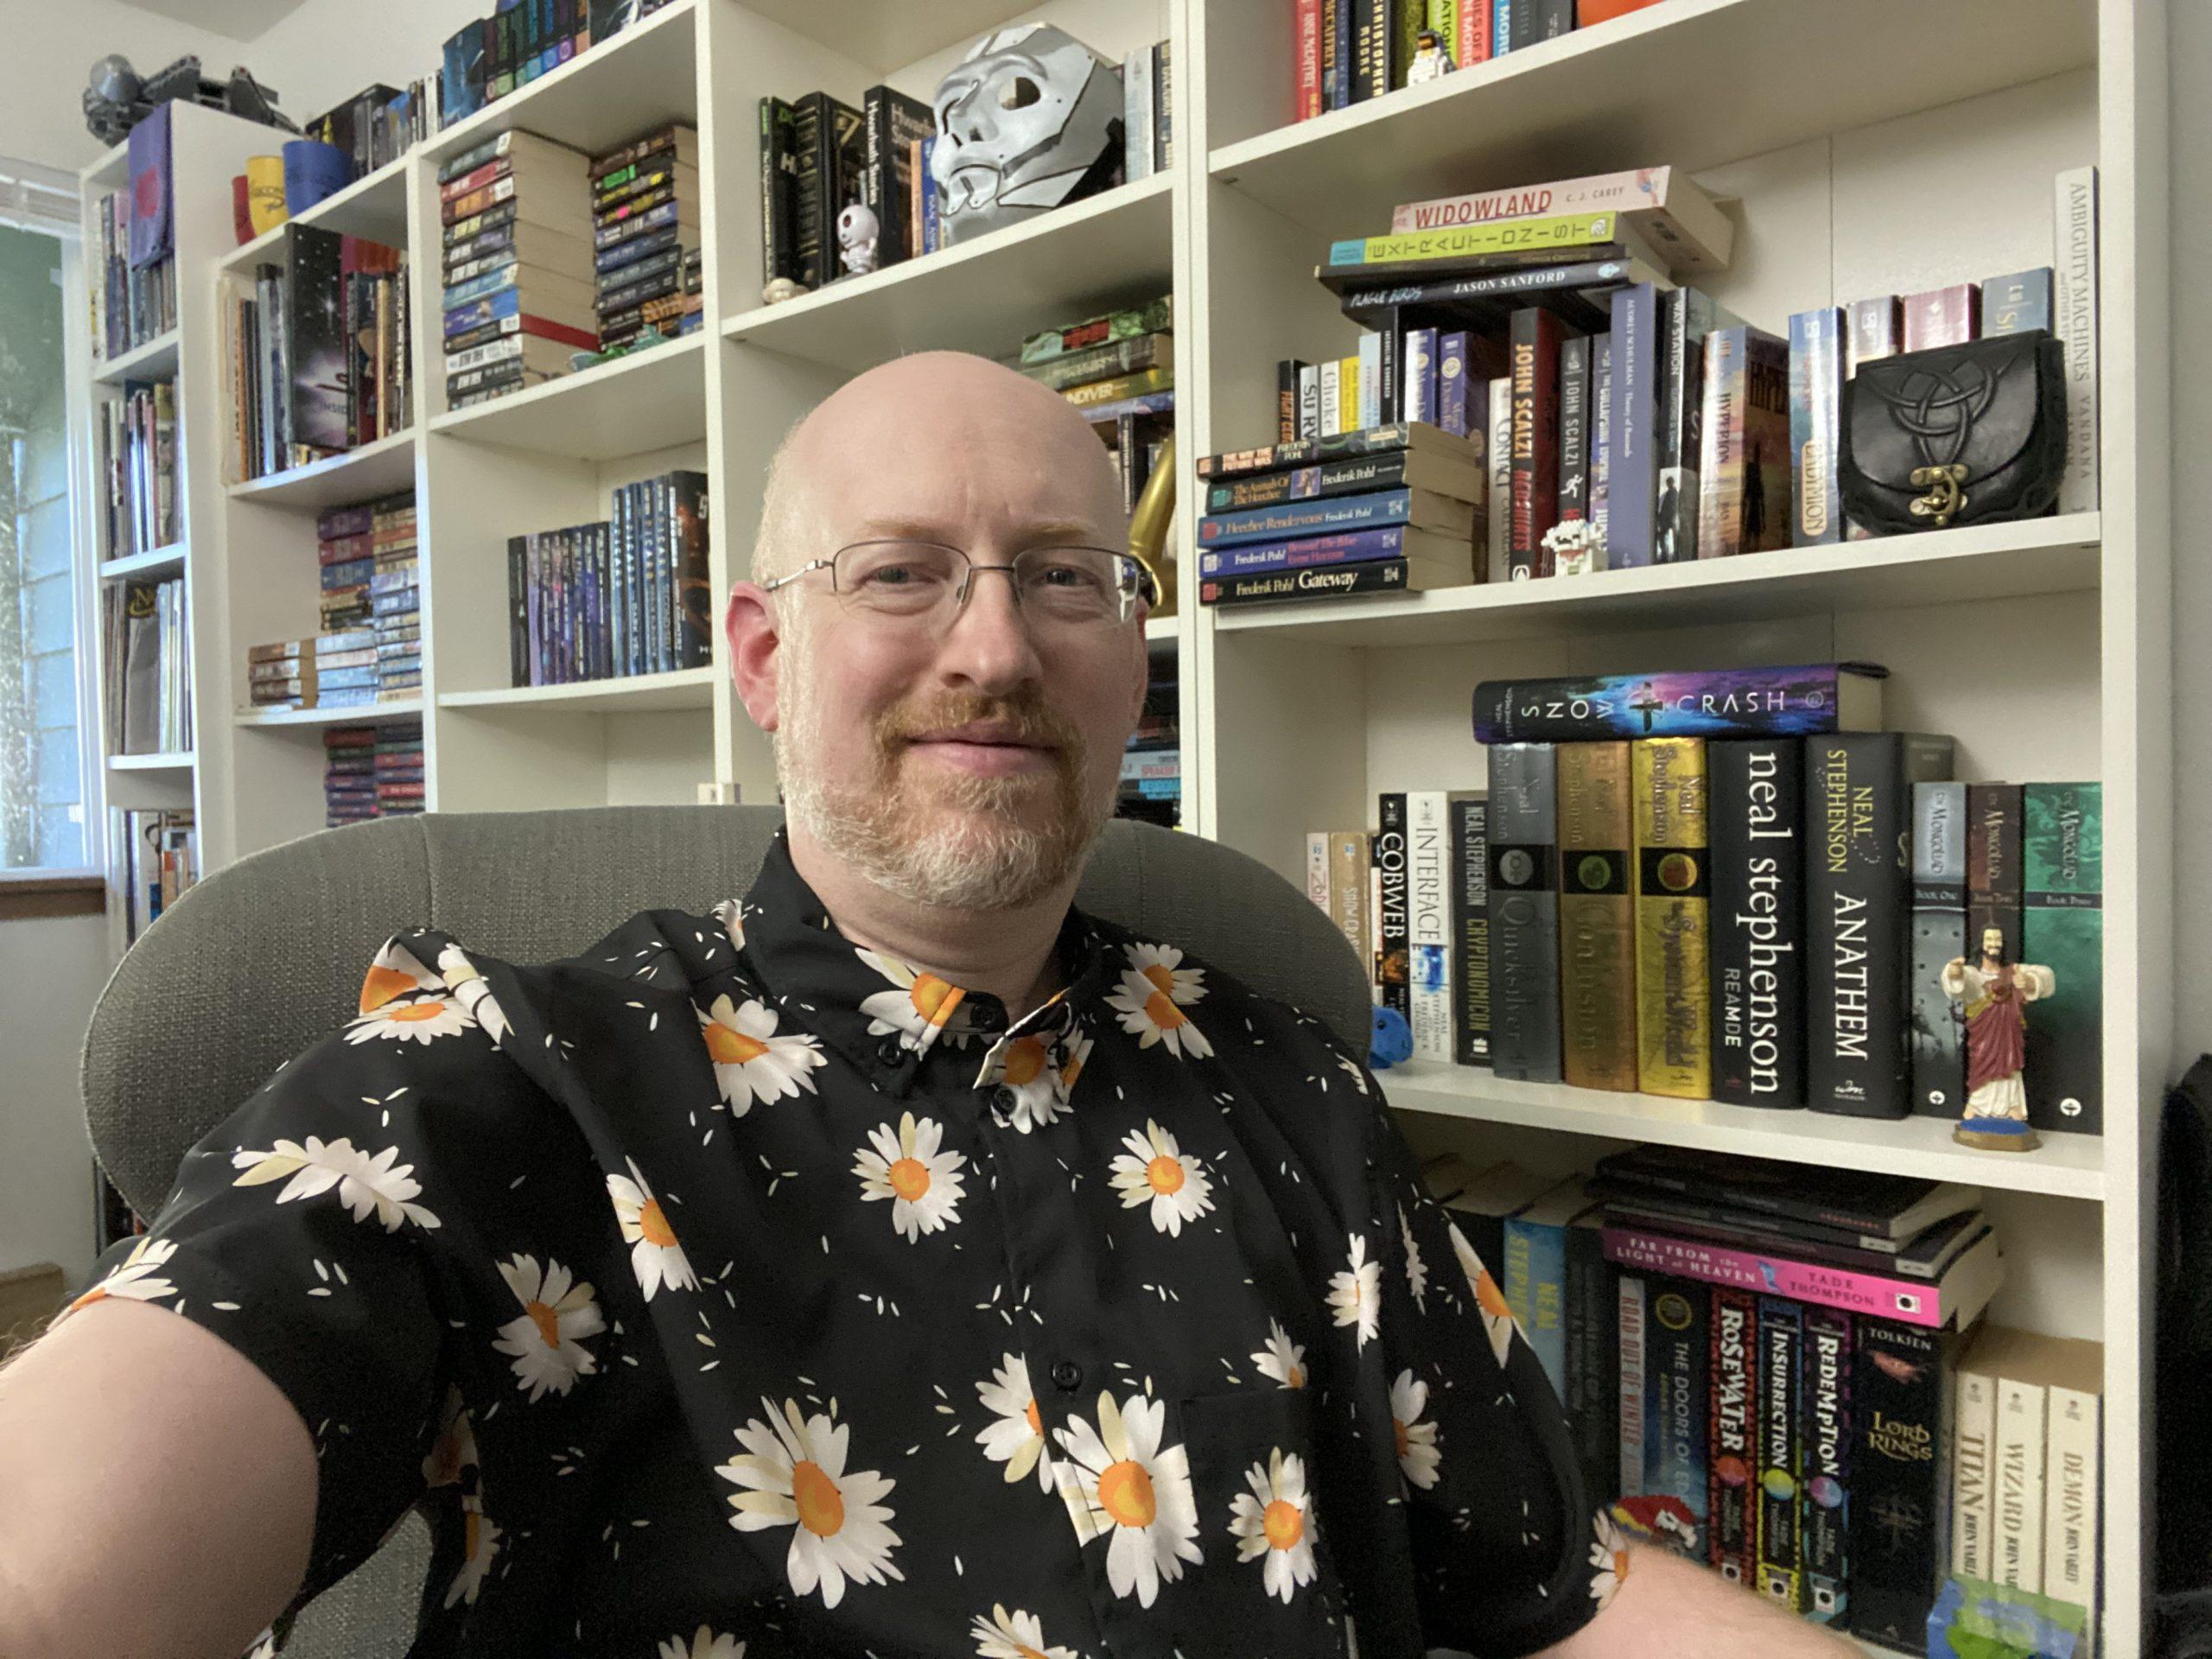 Me wearing a black shirt with daisies printed on it, sitting in a grey chair in front of several white bookcases, all filled with books and knicknacks.